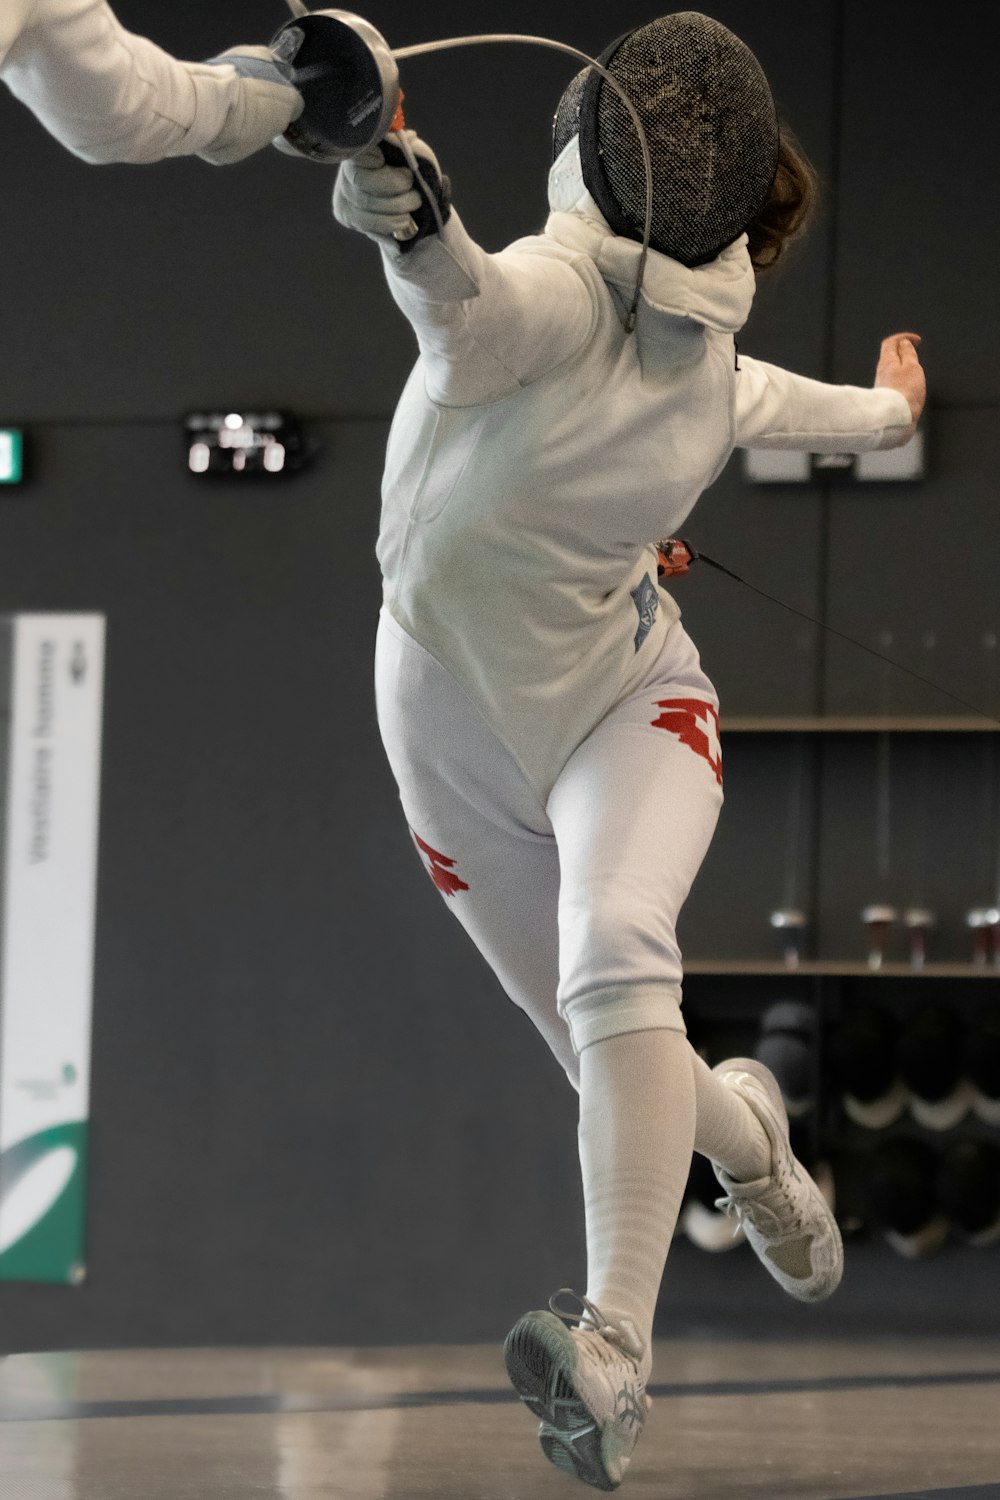 a woman in a fencing outfit is doing a trick